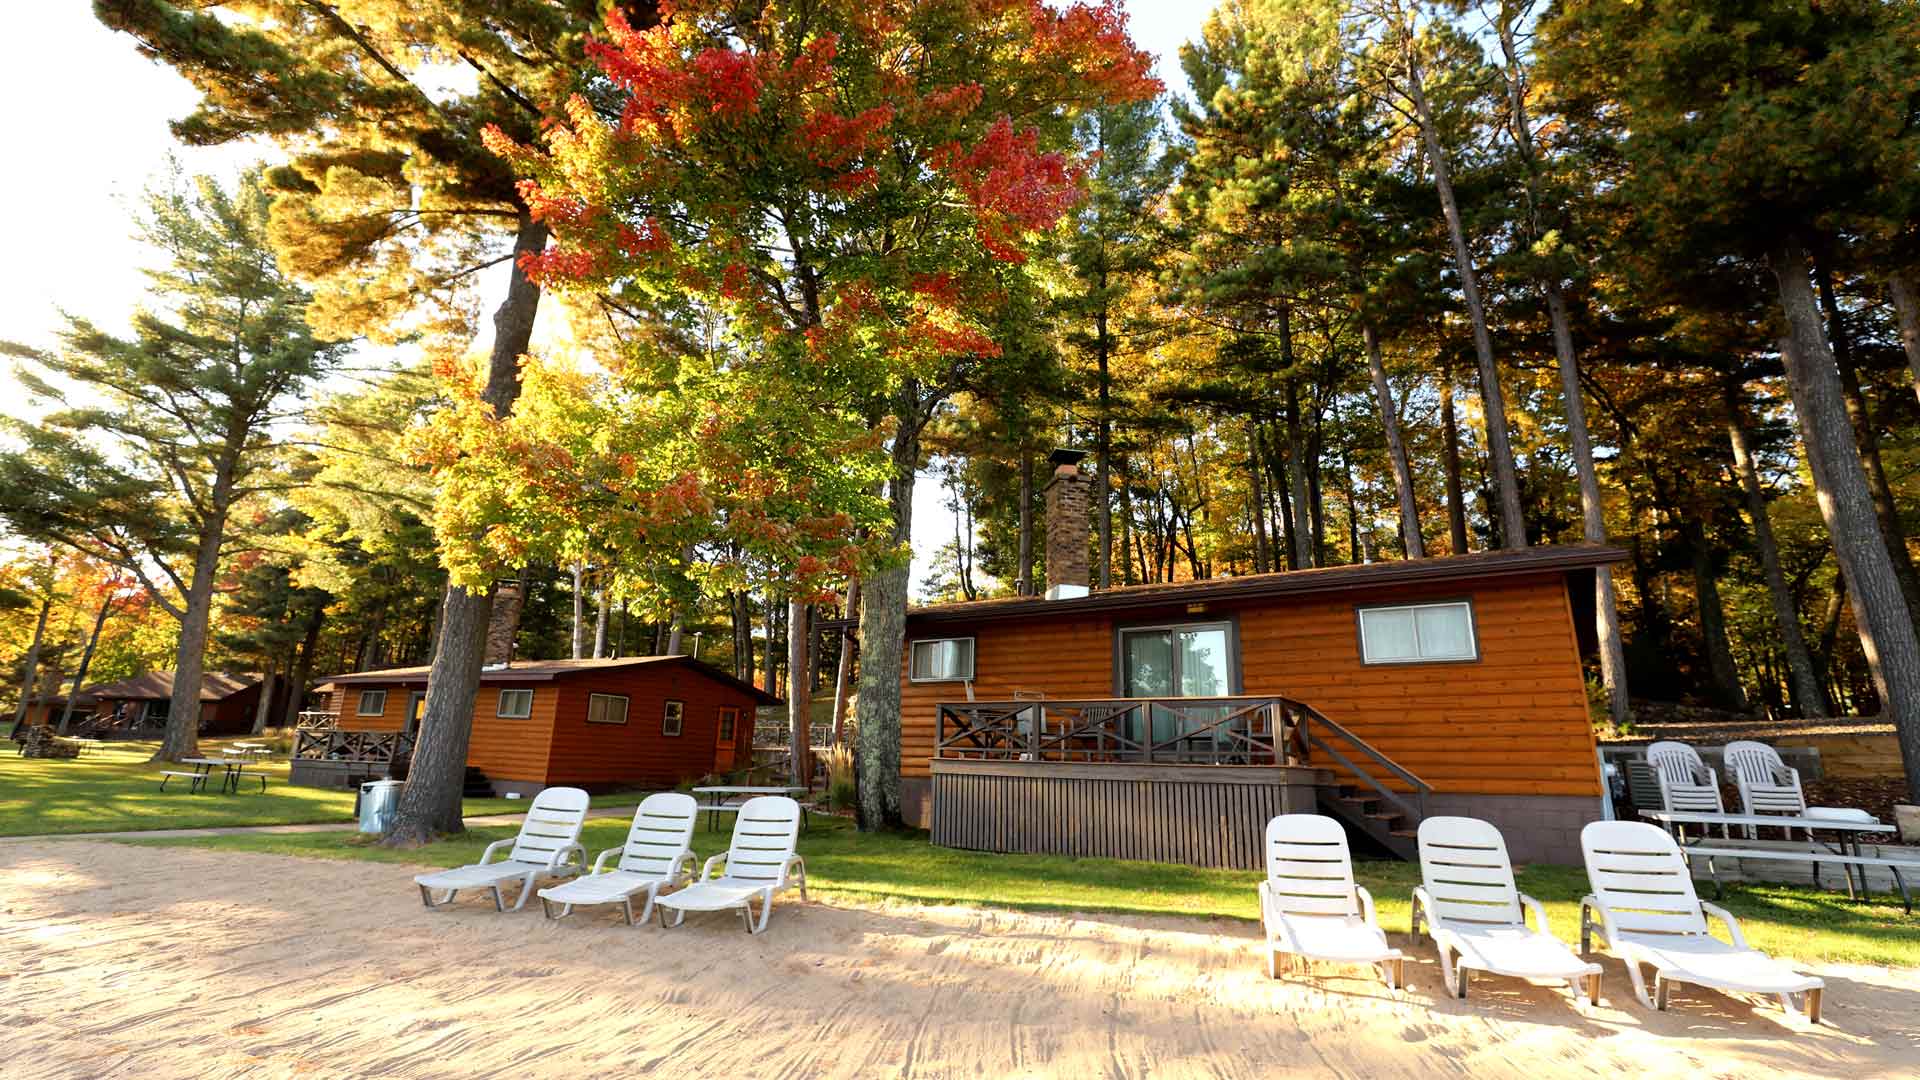 Serenity Bay Resort offers lakeside cabins on Little St. Germain Lake in Vilas County, Wisconsin.